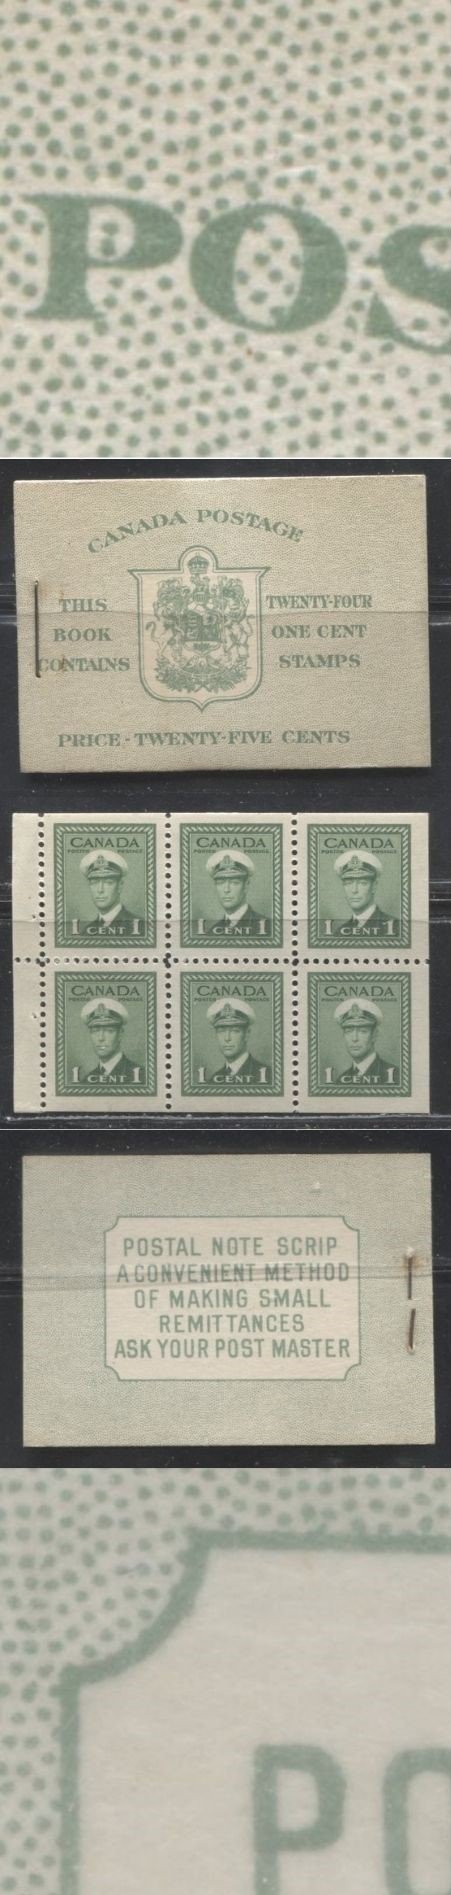 Lot 244 Canada #BK32f 1942-1949 War Issue, Complete 25¢ English Booklet, 4 Panes of 1c Green, Ribbed and Smooth Wove Paper, Harris Front Cover Type IIb, Back Cover Type Cbi, 7c & 6c Airmail Rates Page